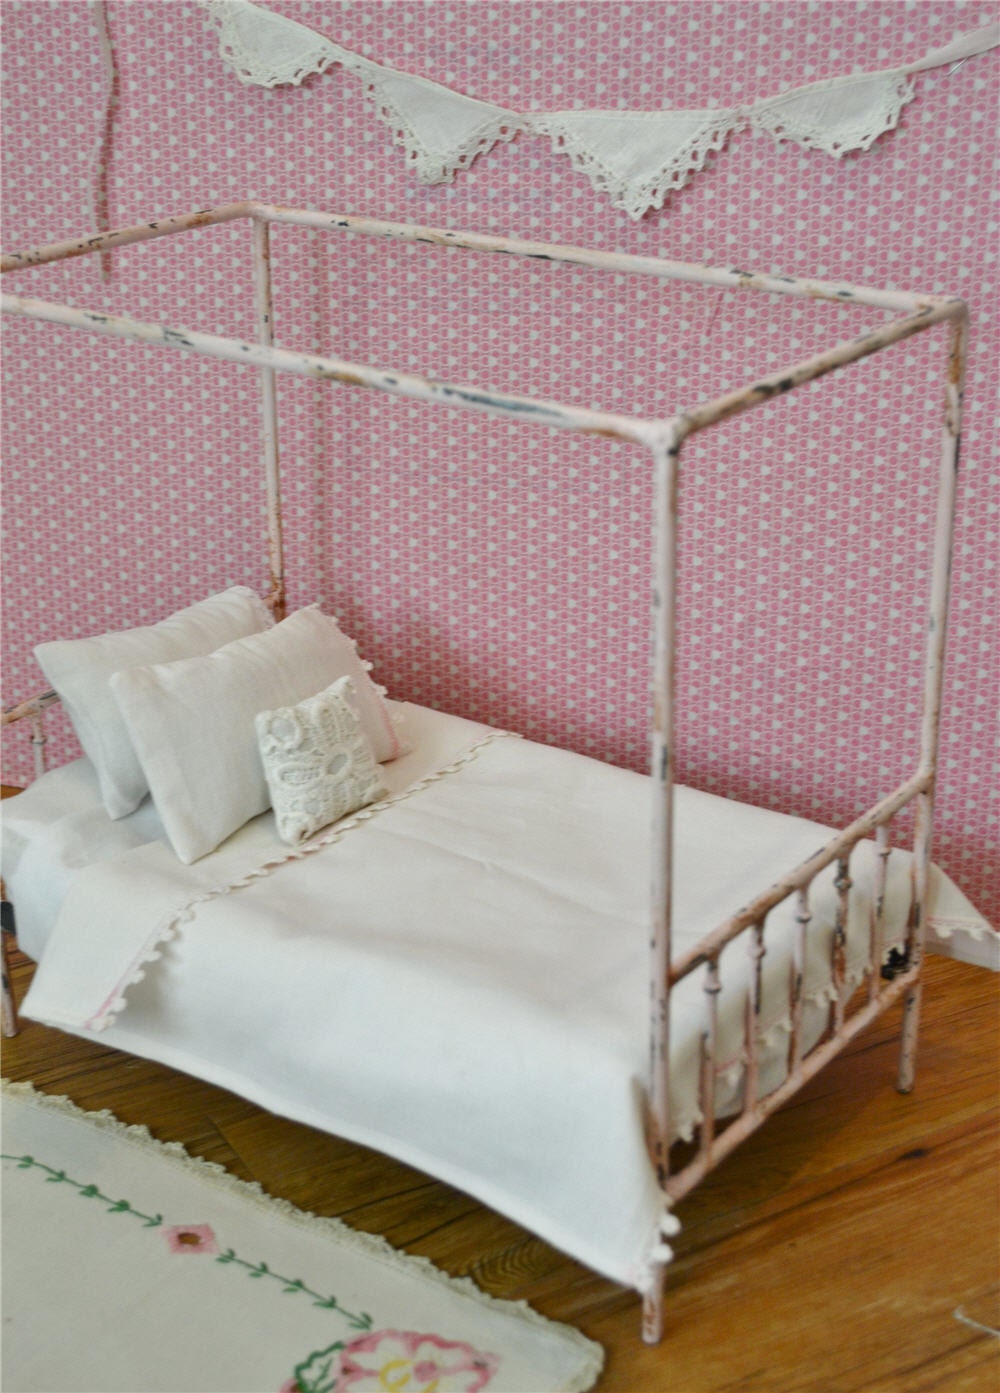 ... Bed Pink Antique Metal 1/6th Playscale Blythe Canopy Doll Bed Barbie